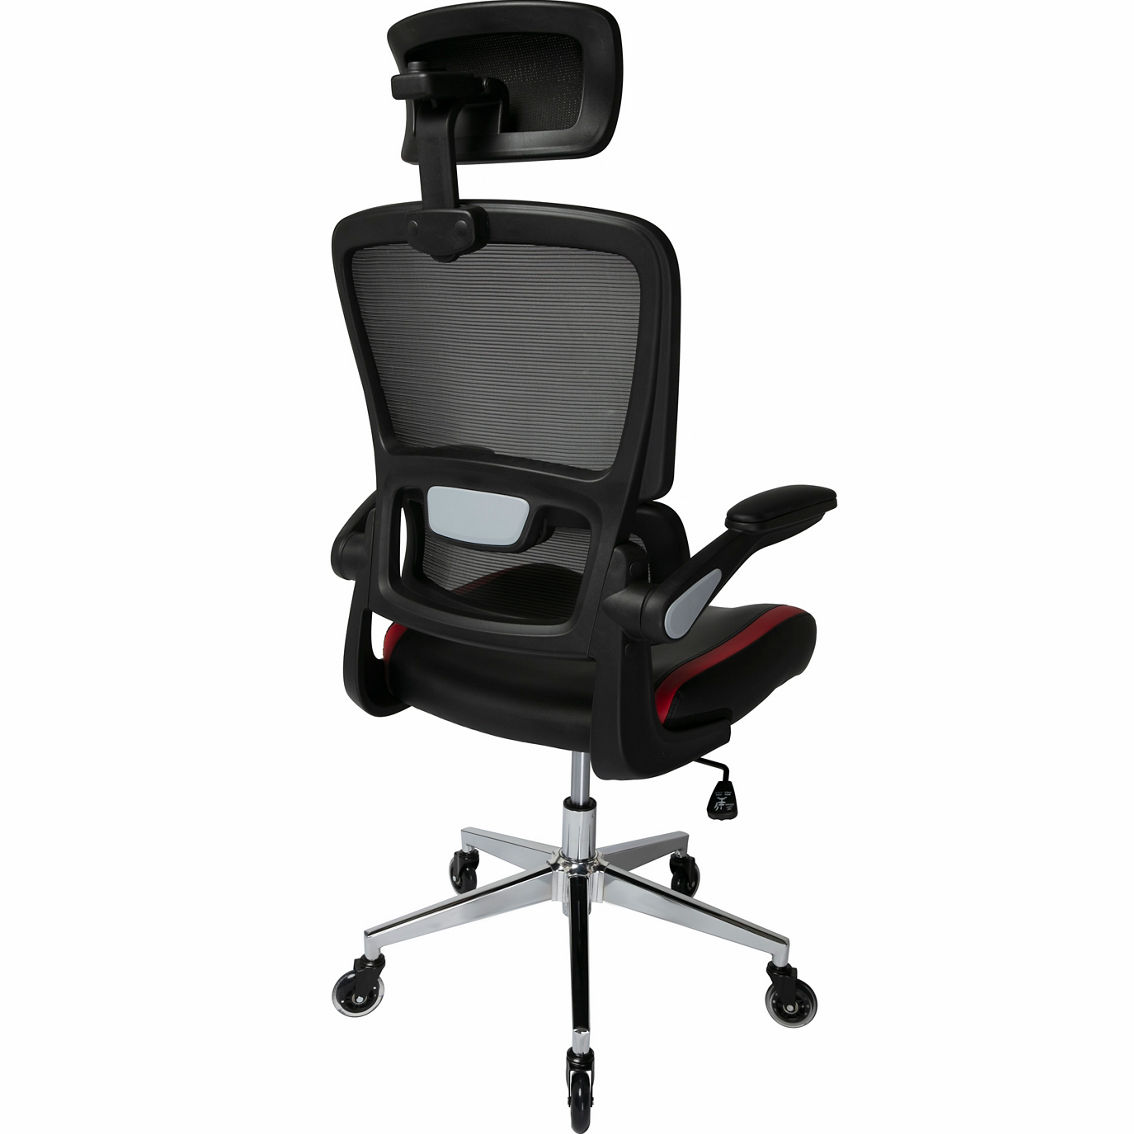 Simply Perfect Mesh Office Chair with Headrest - Image 6 of 10